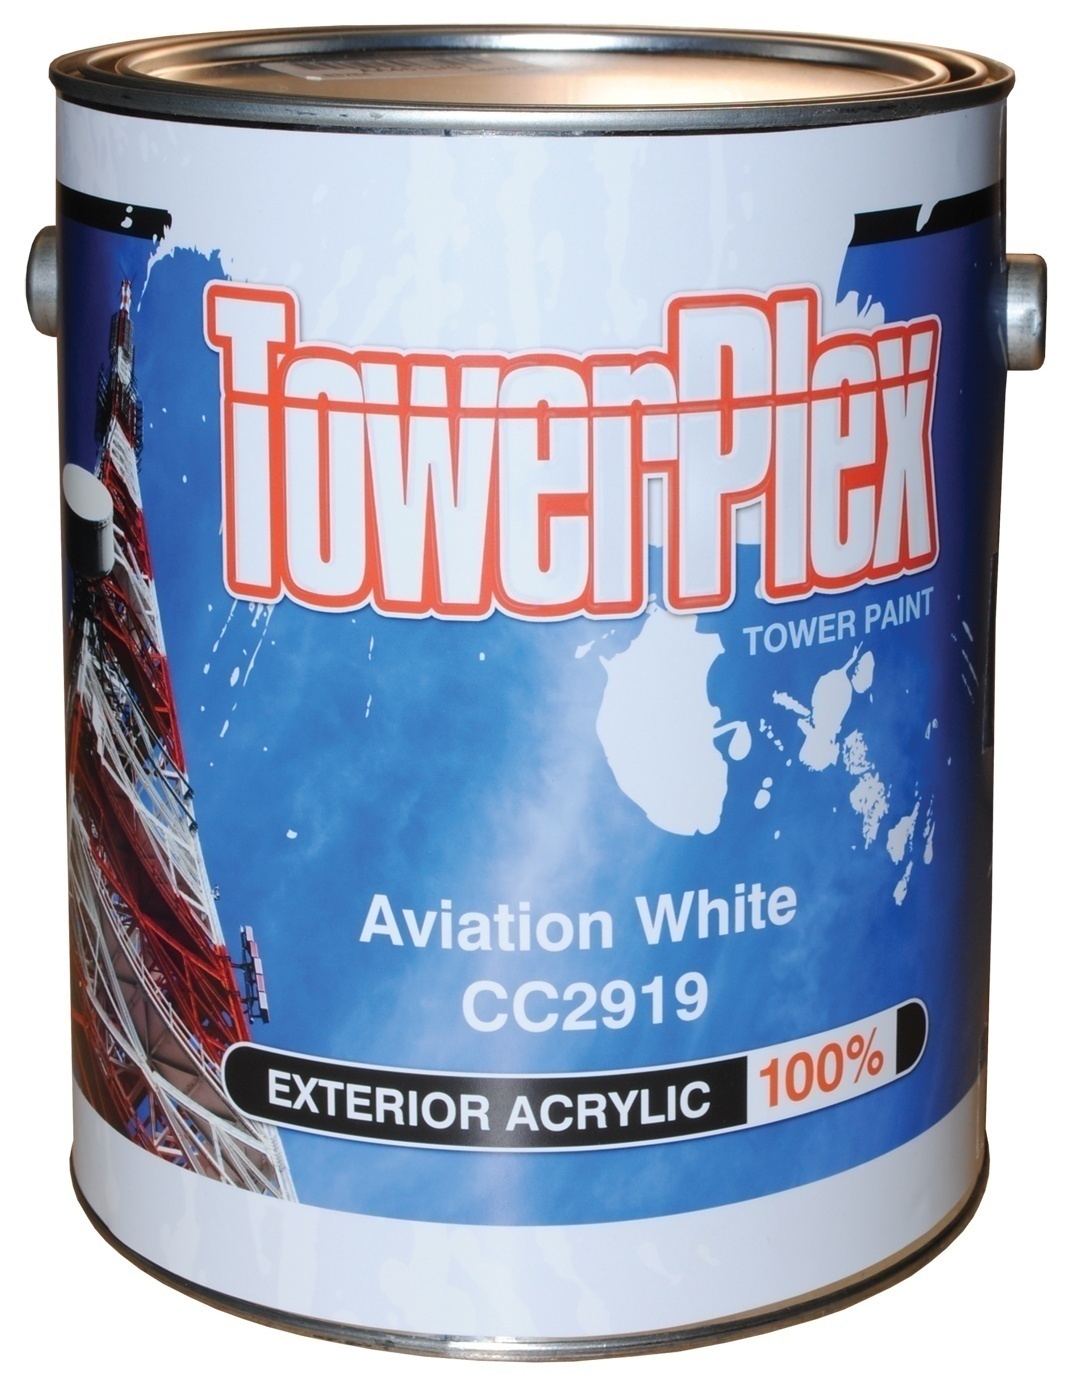 CC2919 TowerPlex Aviation White Tower Paint (1 Gallon Pail) from Columbia Safety